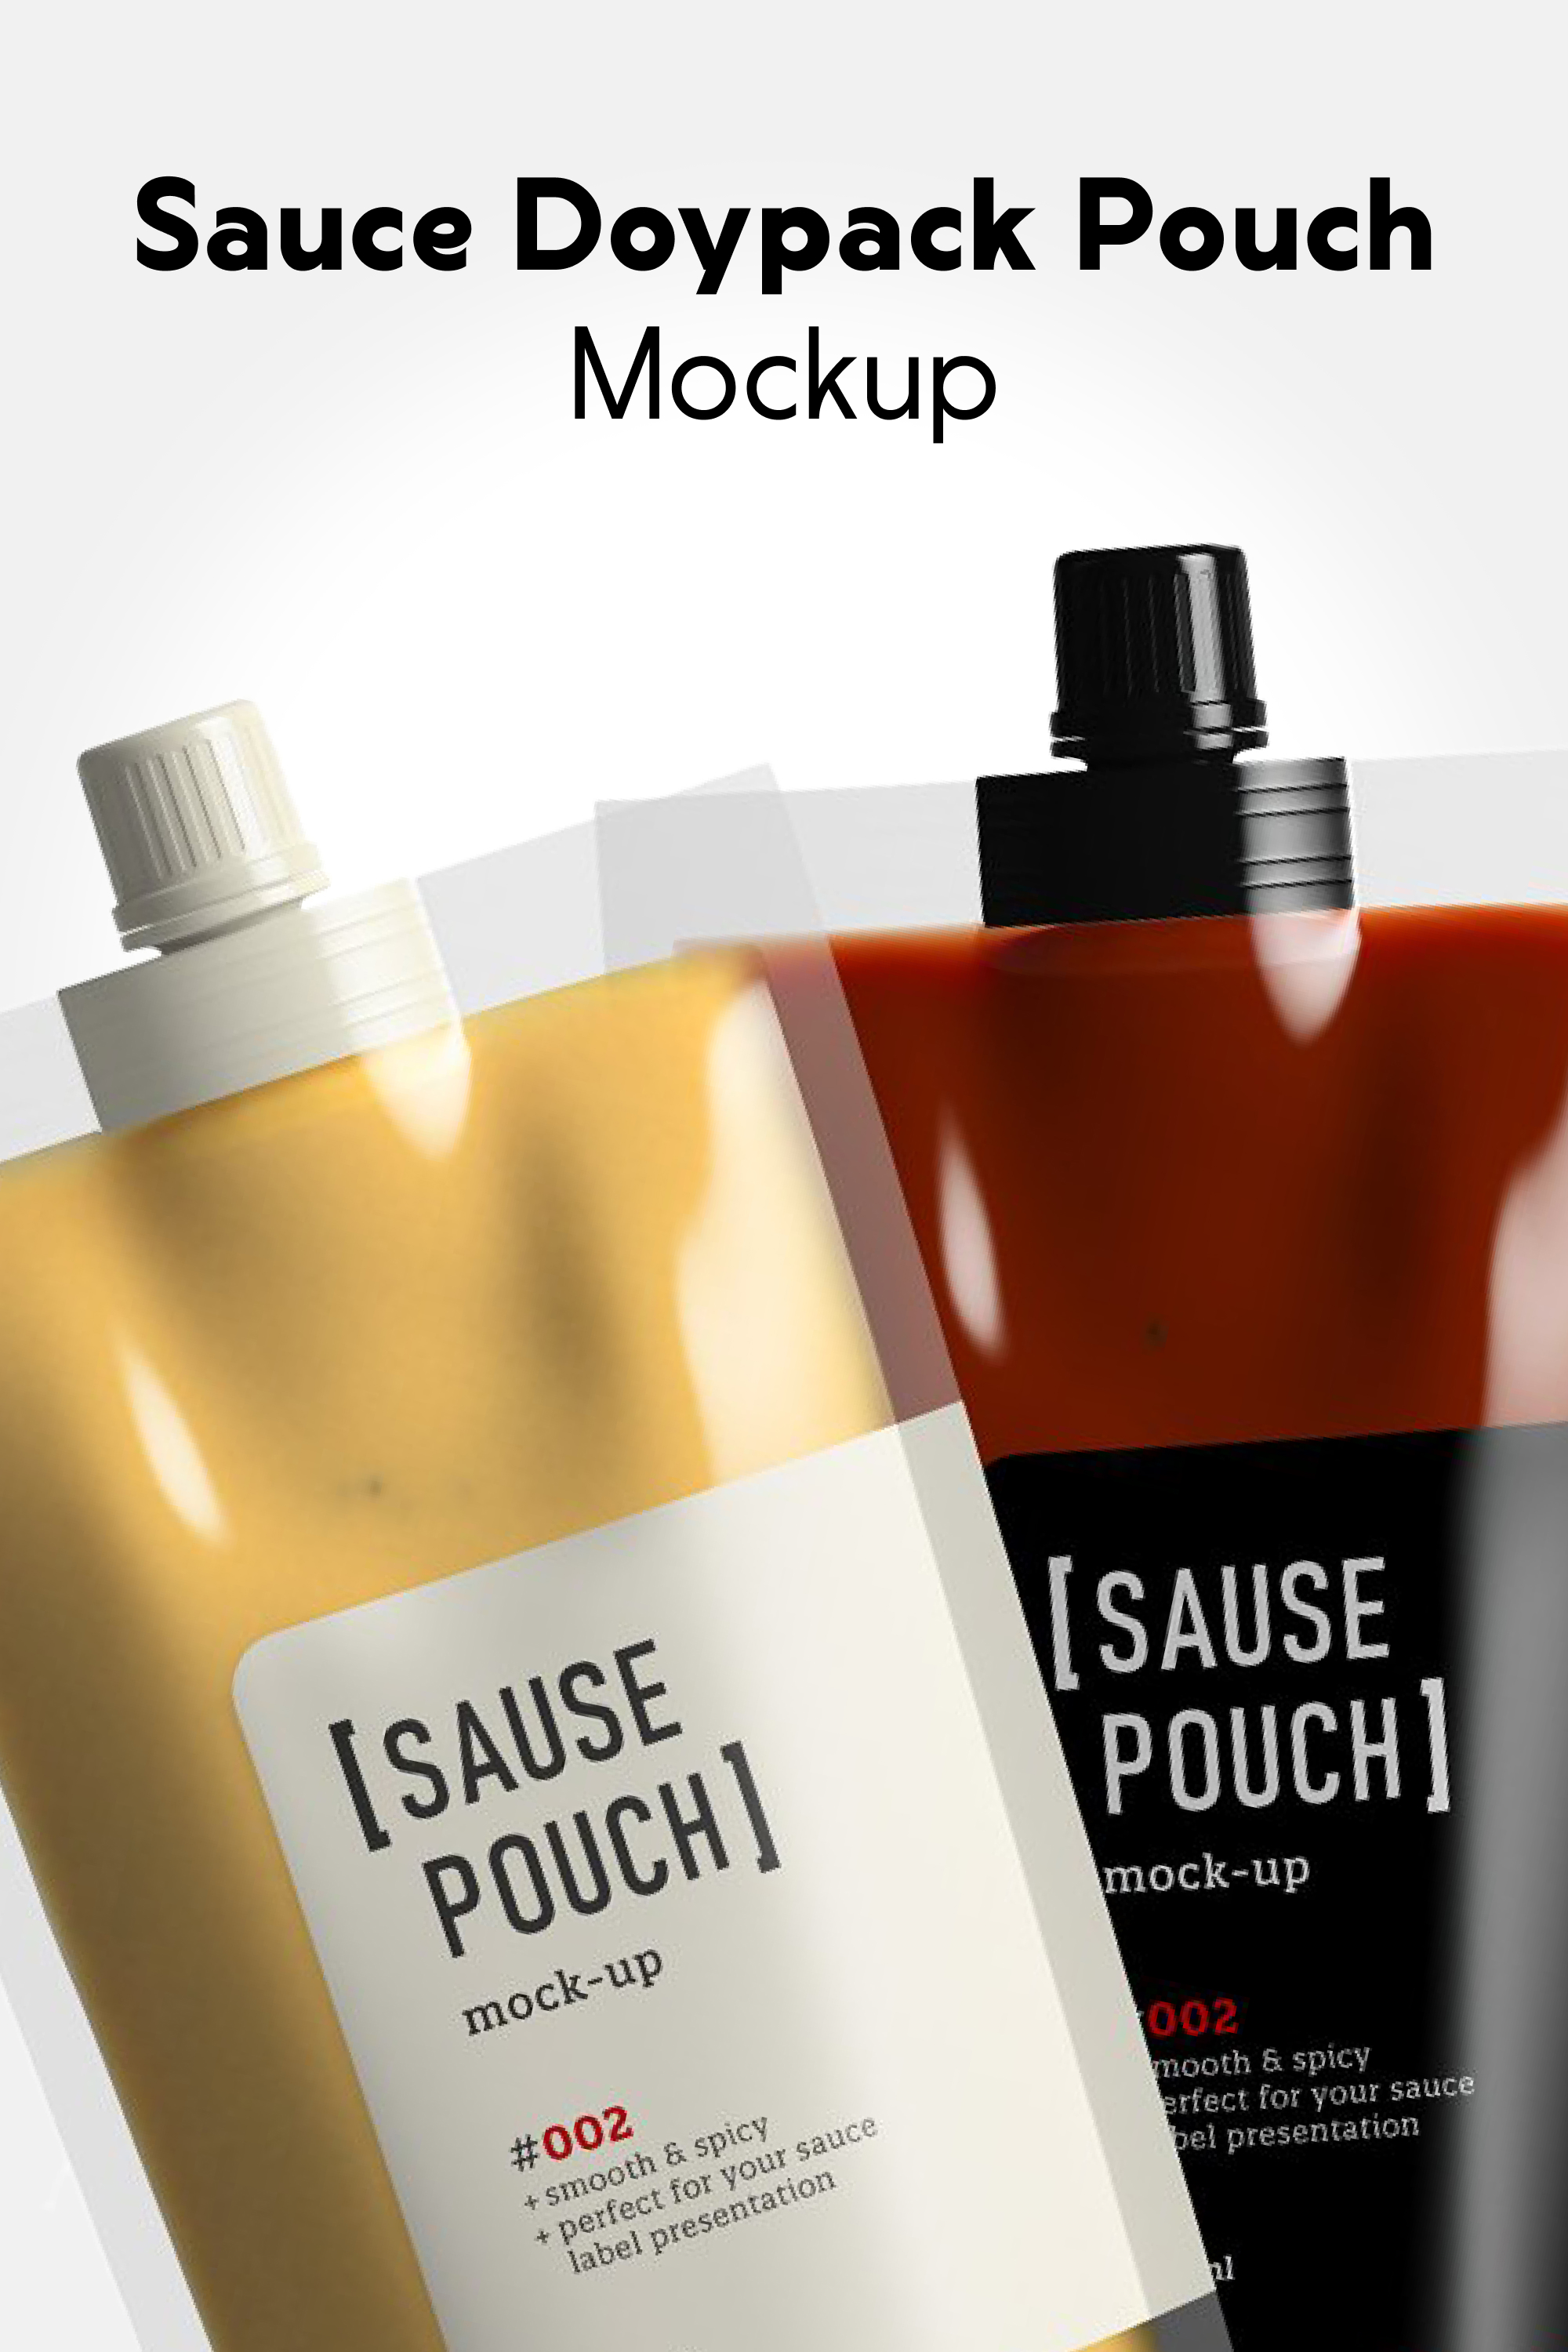 Sauce doypack pouch mockup of pinterest.